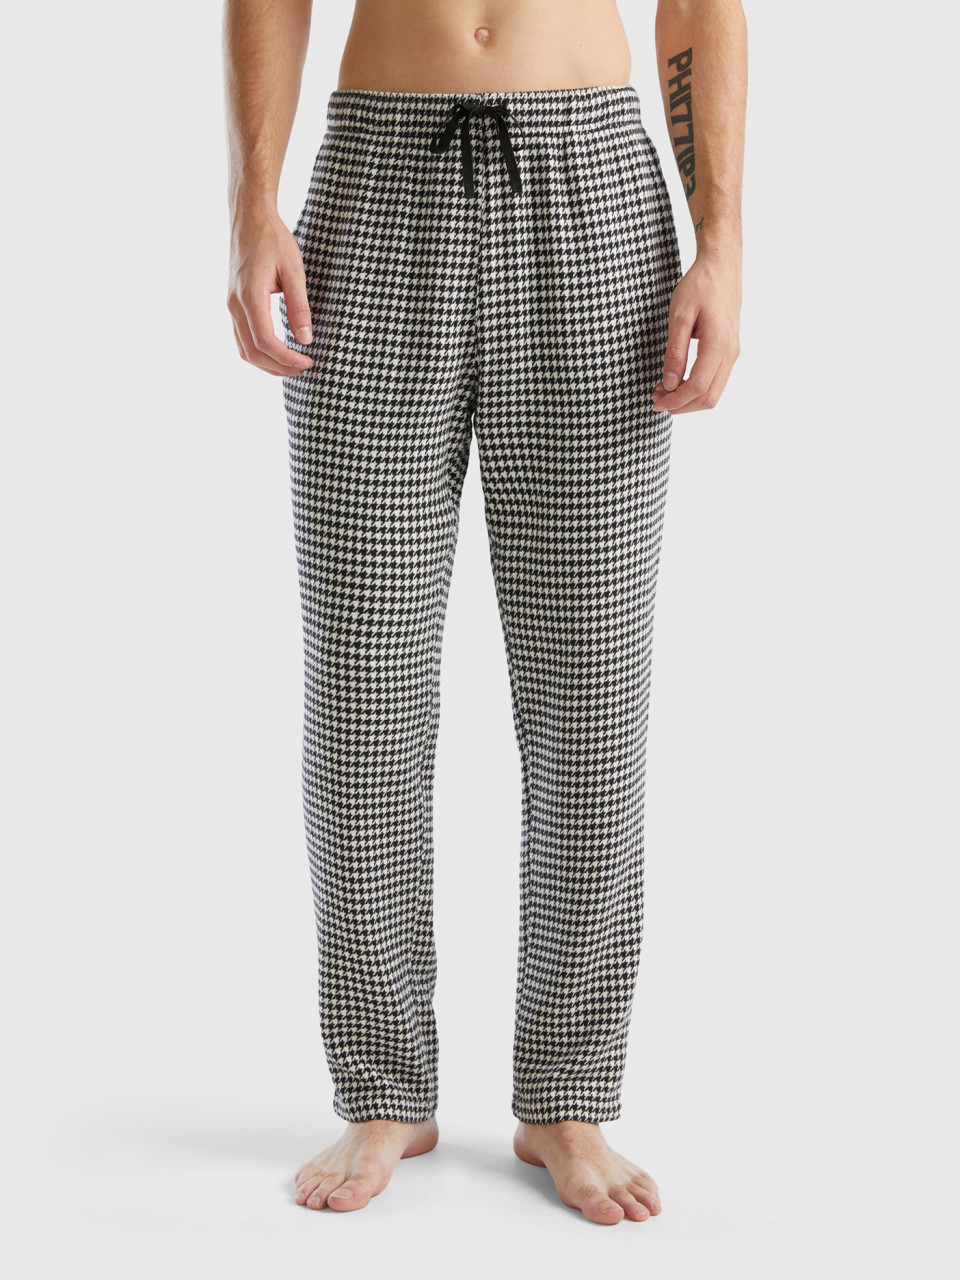 Benetton, Houndstooth Trousers, Multi-color, Men